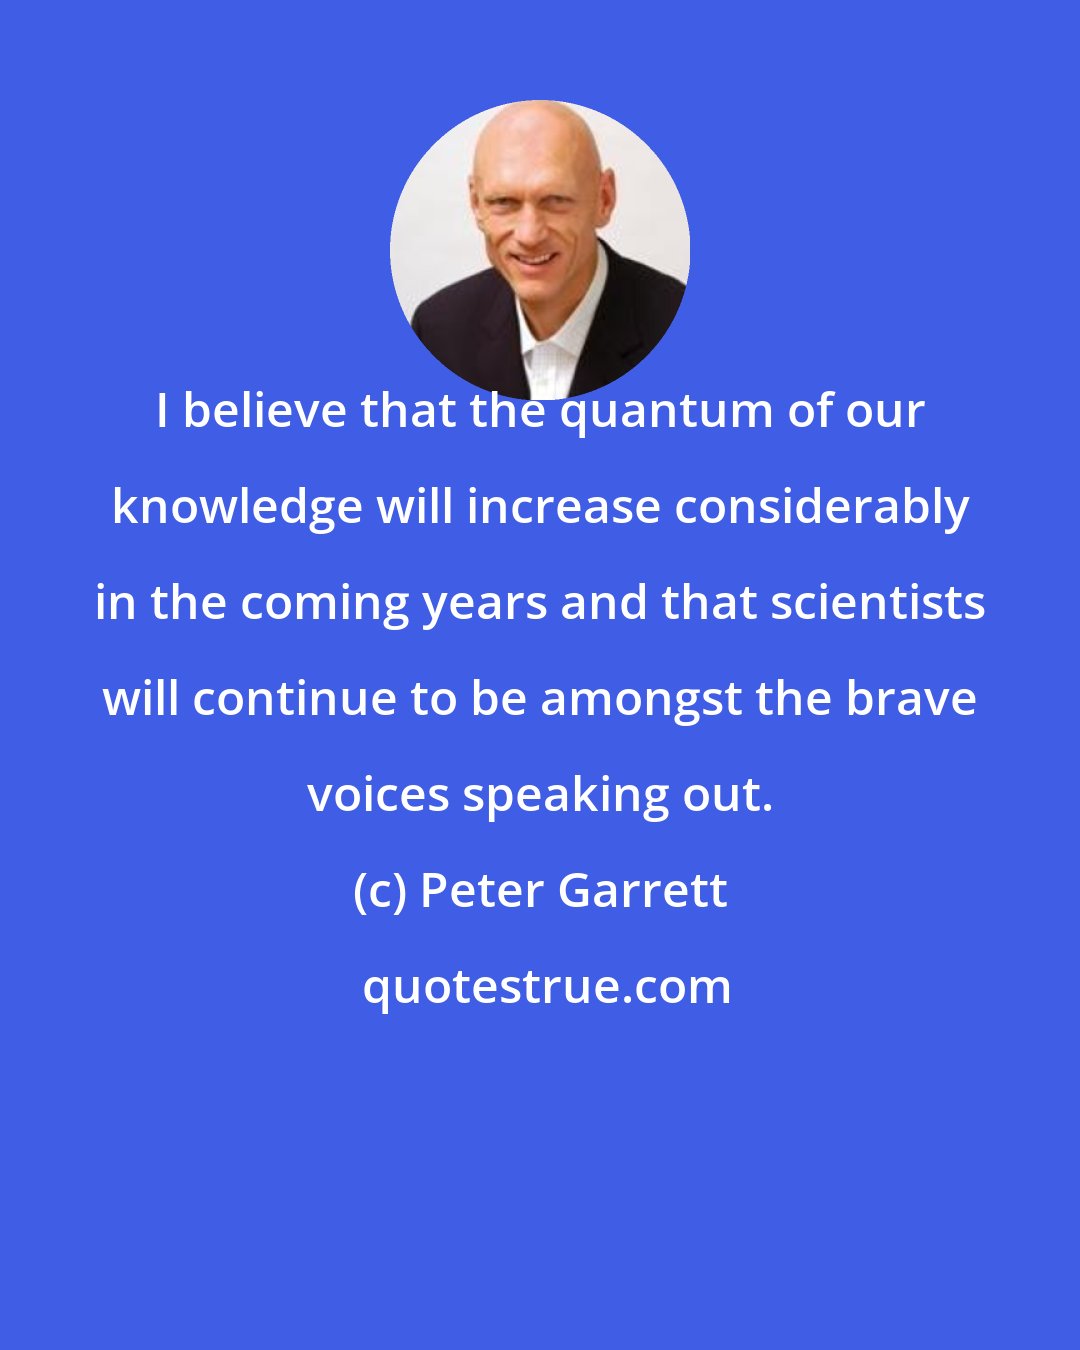 Peter Garrett: I believe that the quantum of our knowledge will increase considerably in the coming years and that scientists will continue to be amongst the brave voices speaking out.